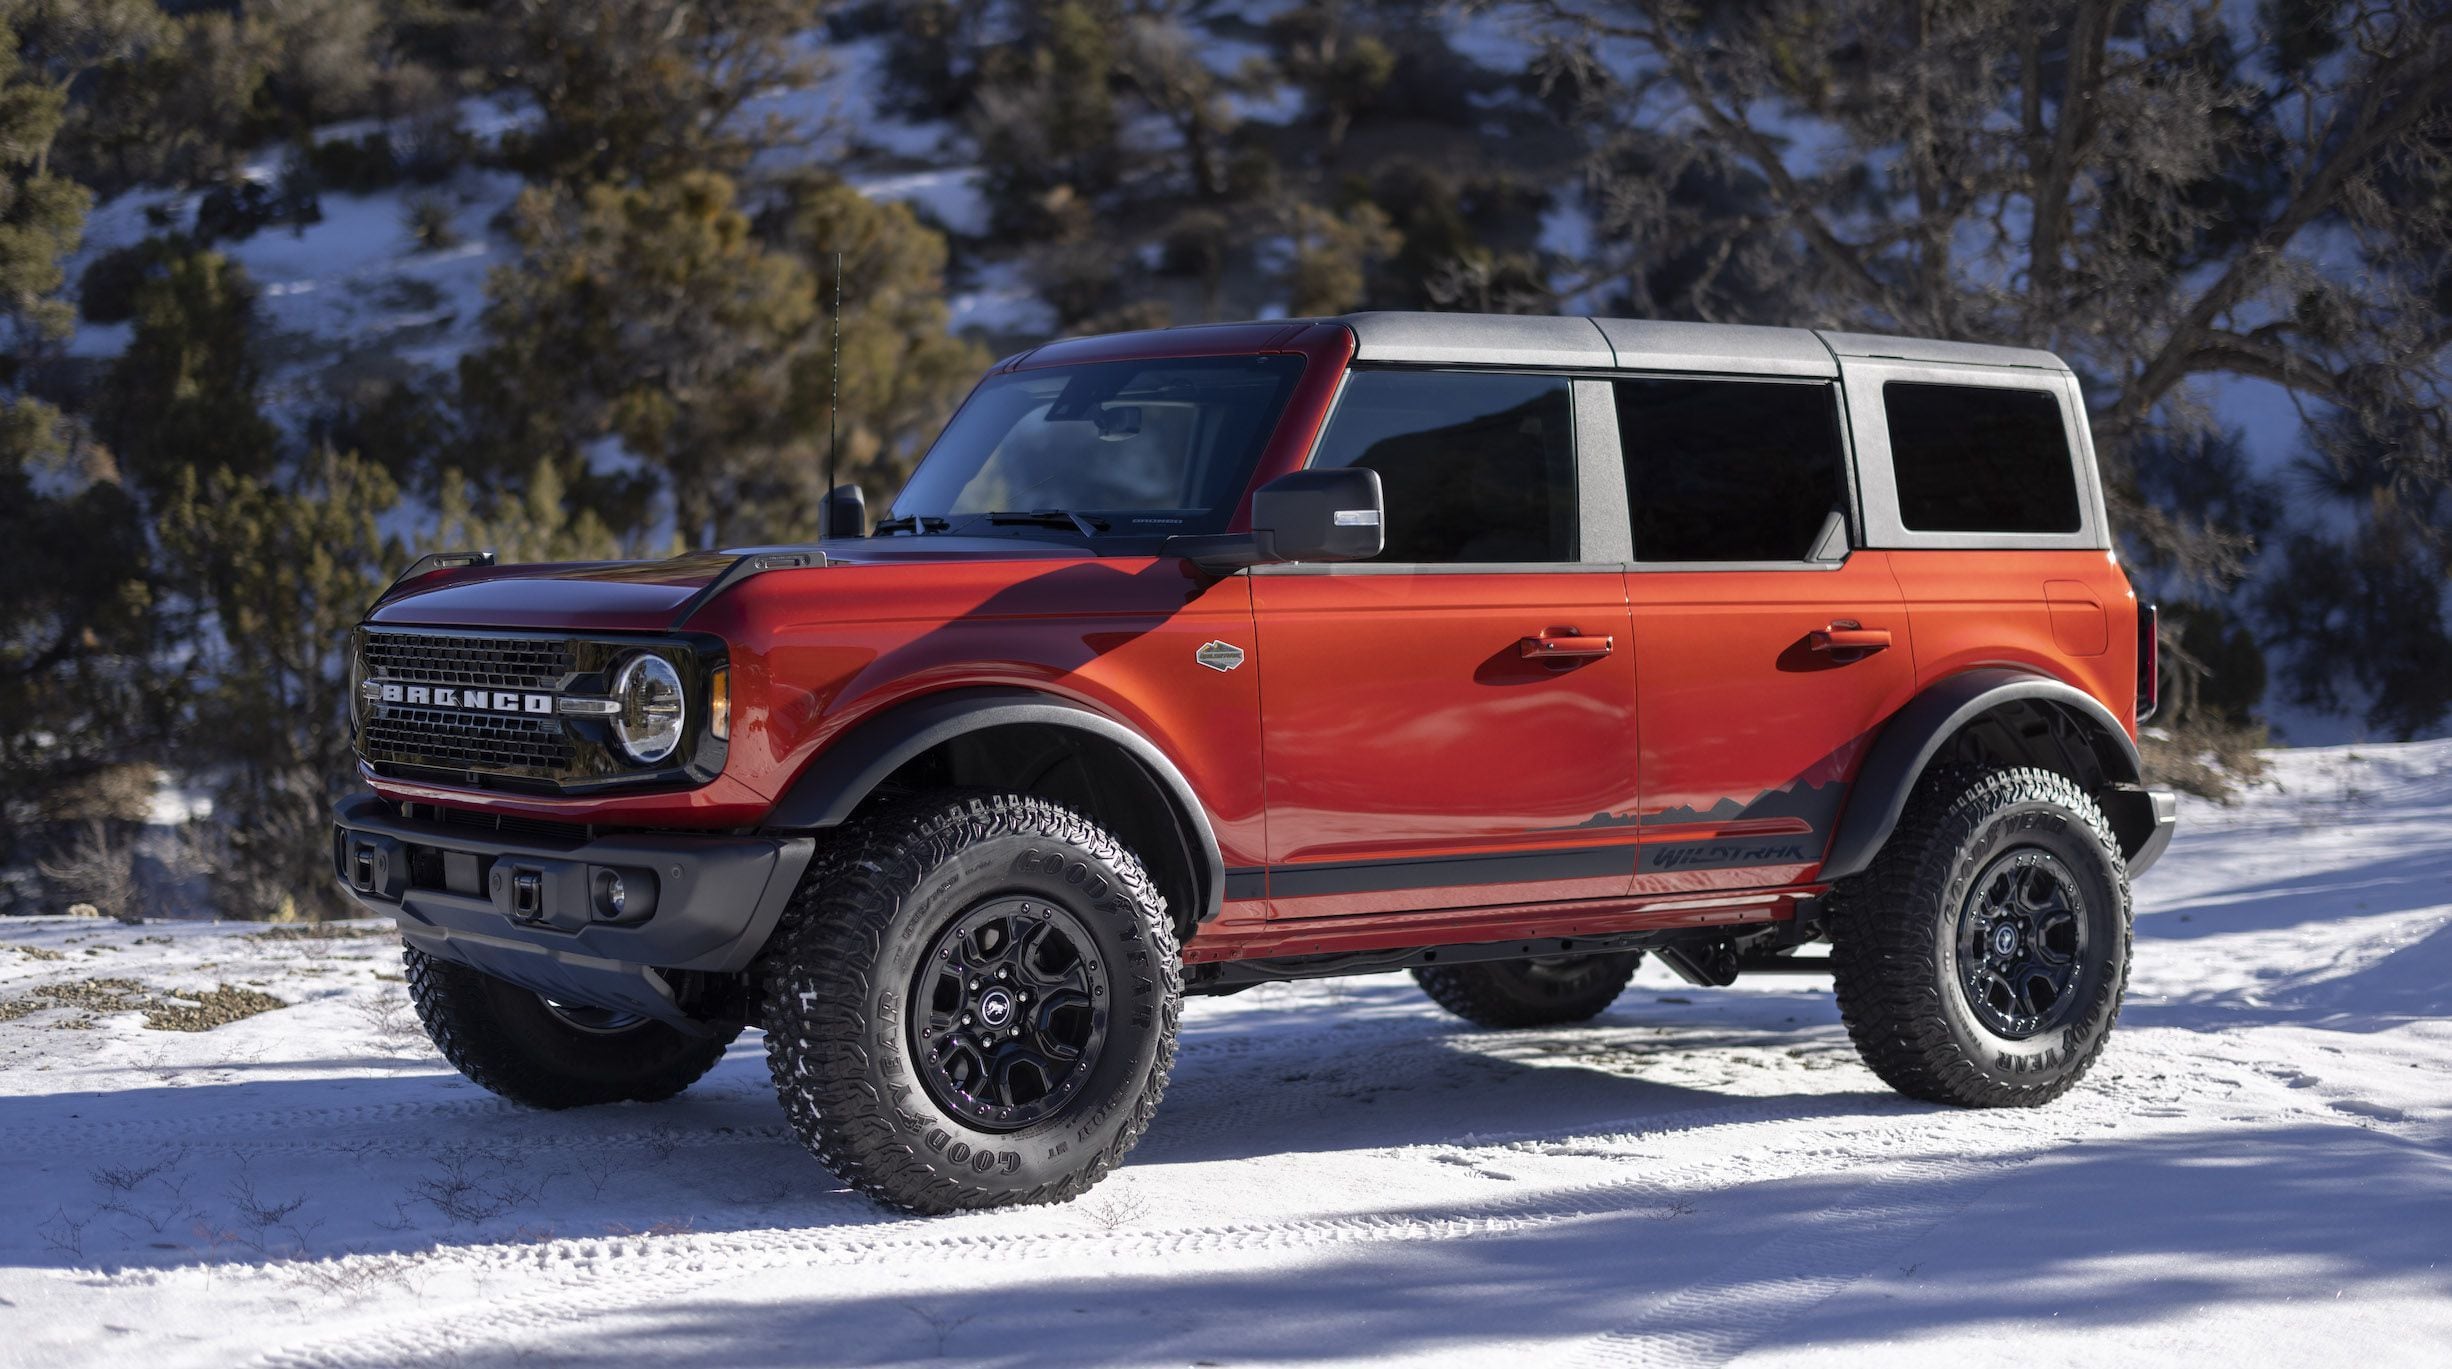 Get far, far off the beaten path with the best off-road vehicles on sale -  The Manual